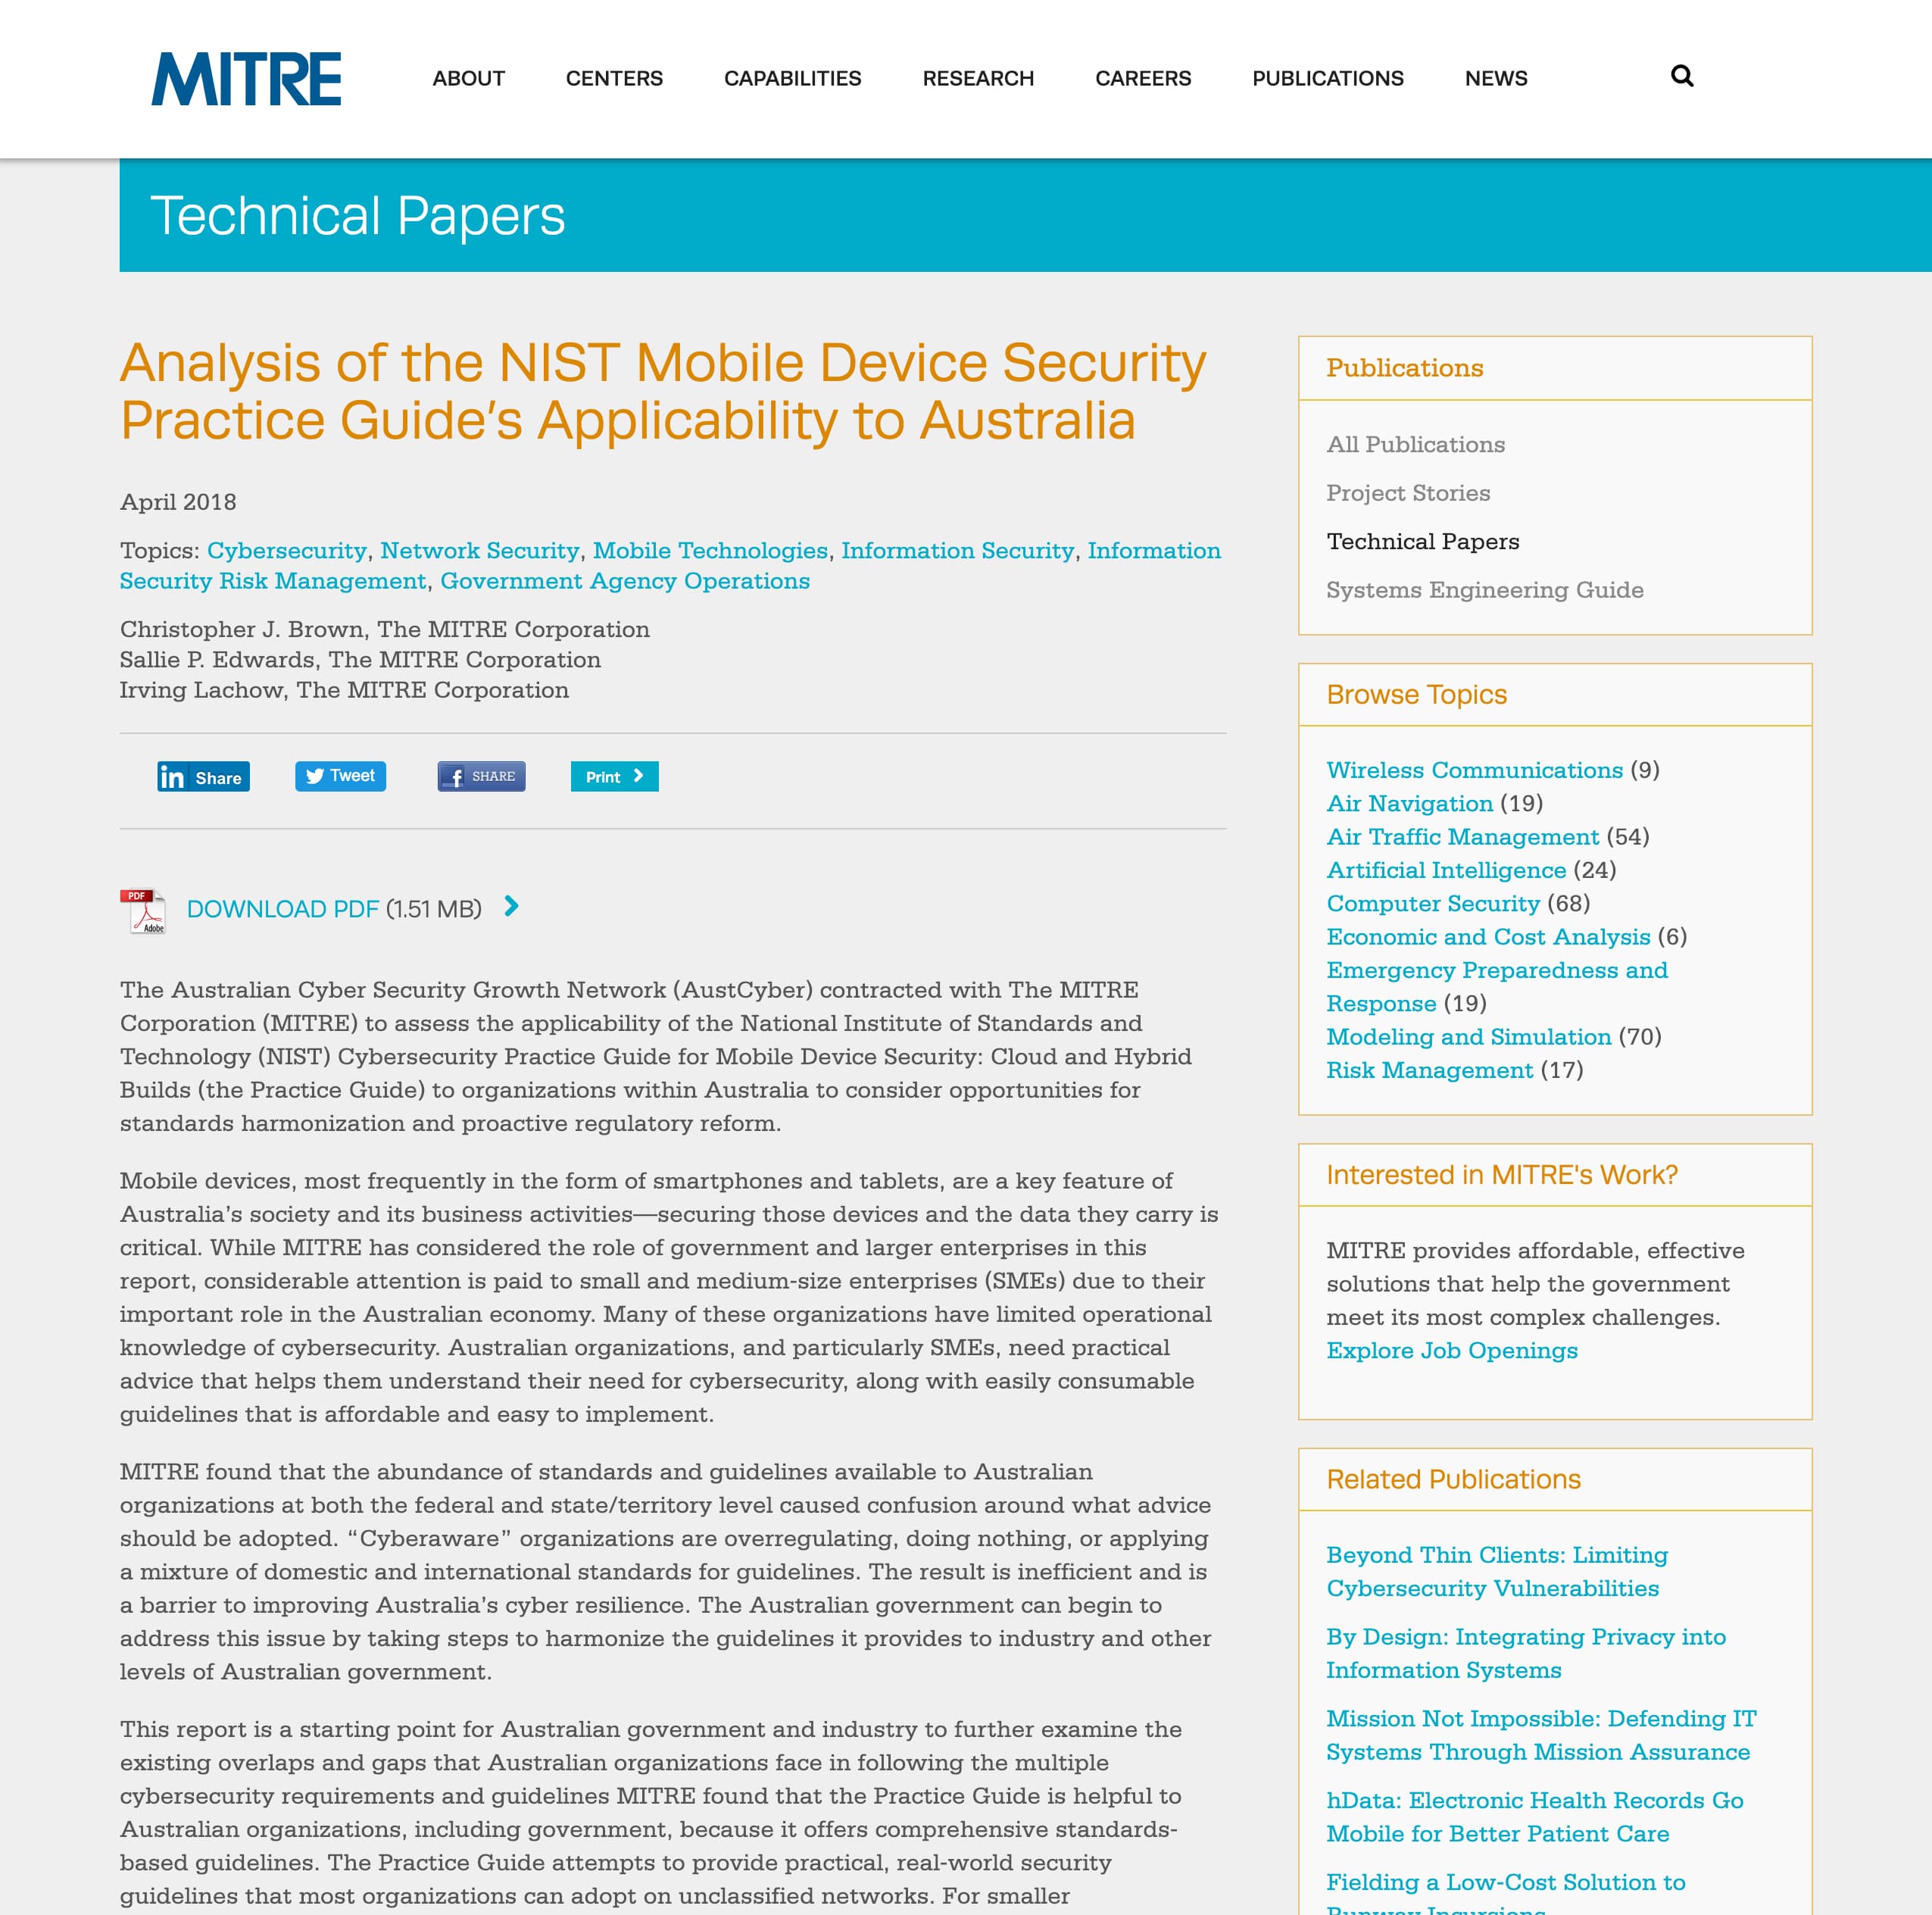 MITRE: Analysis of the NIST Mobile Device Security